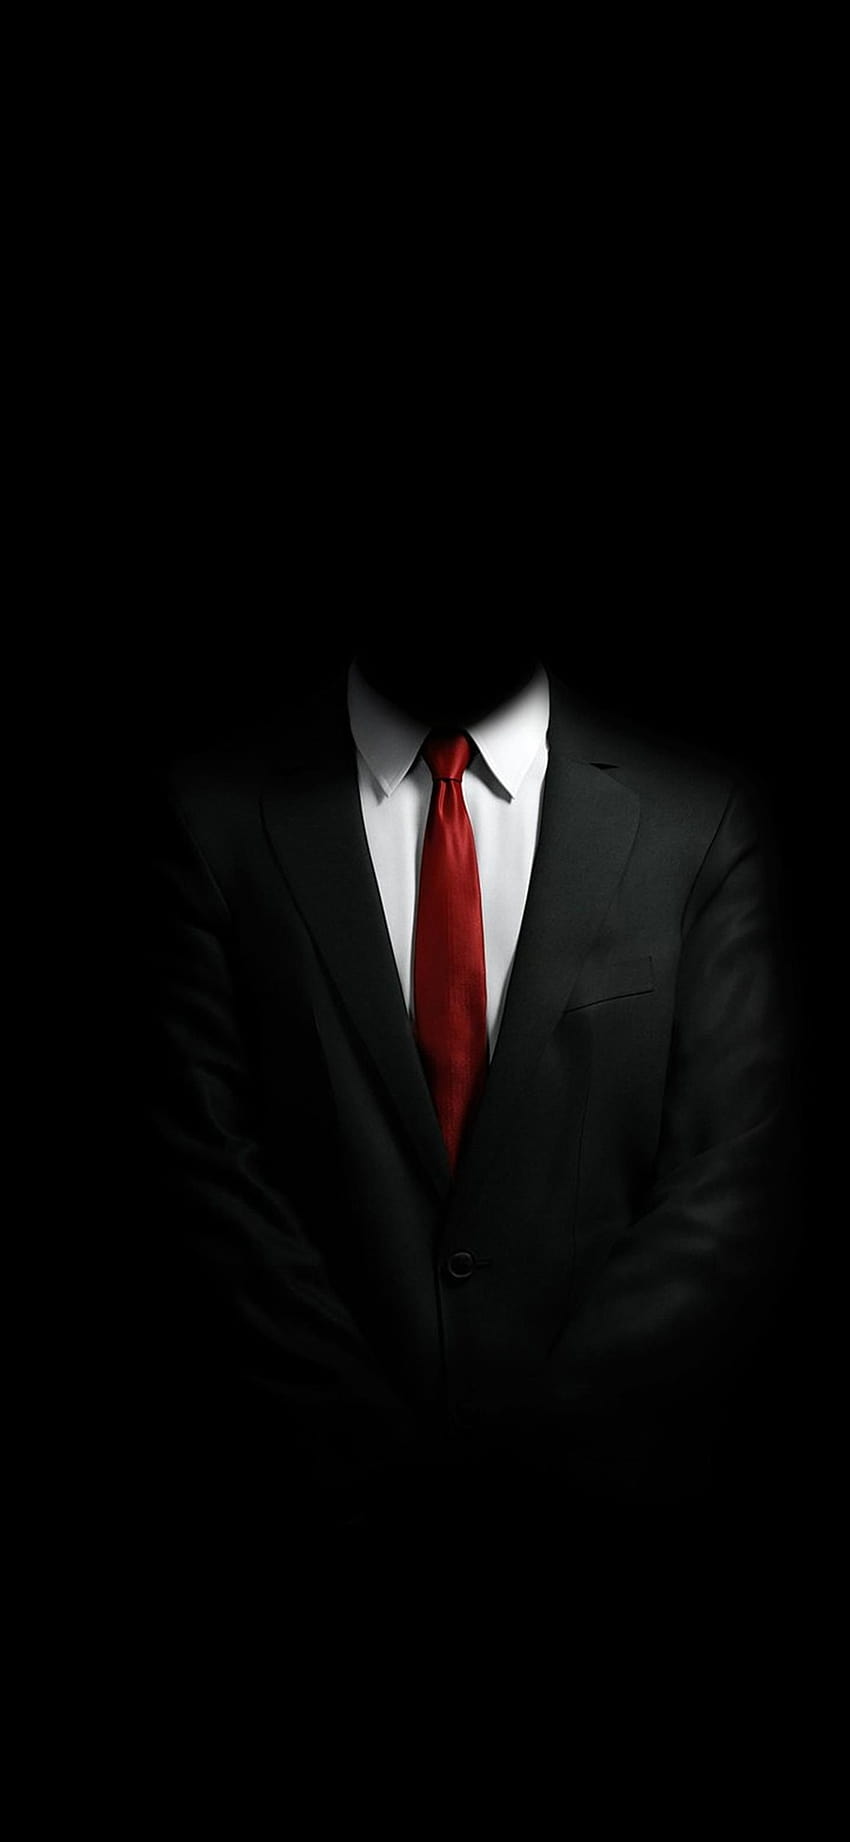 the Mystery Man In Suit ,beaty your phone ., mysterious man HD phone wallpaper